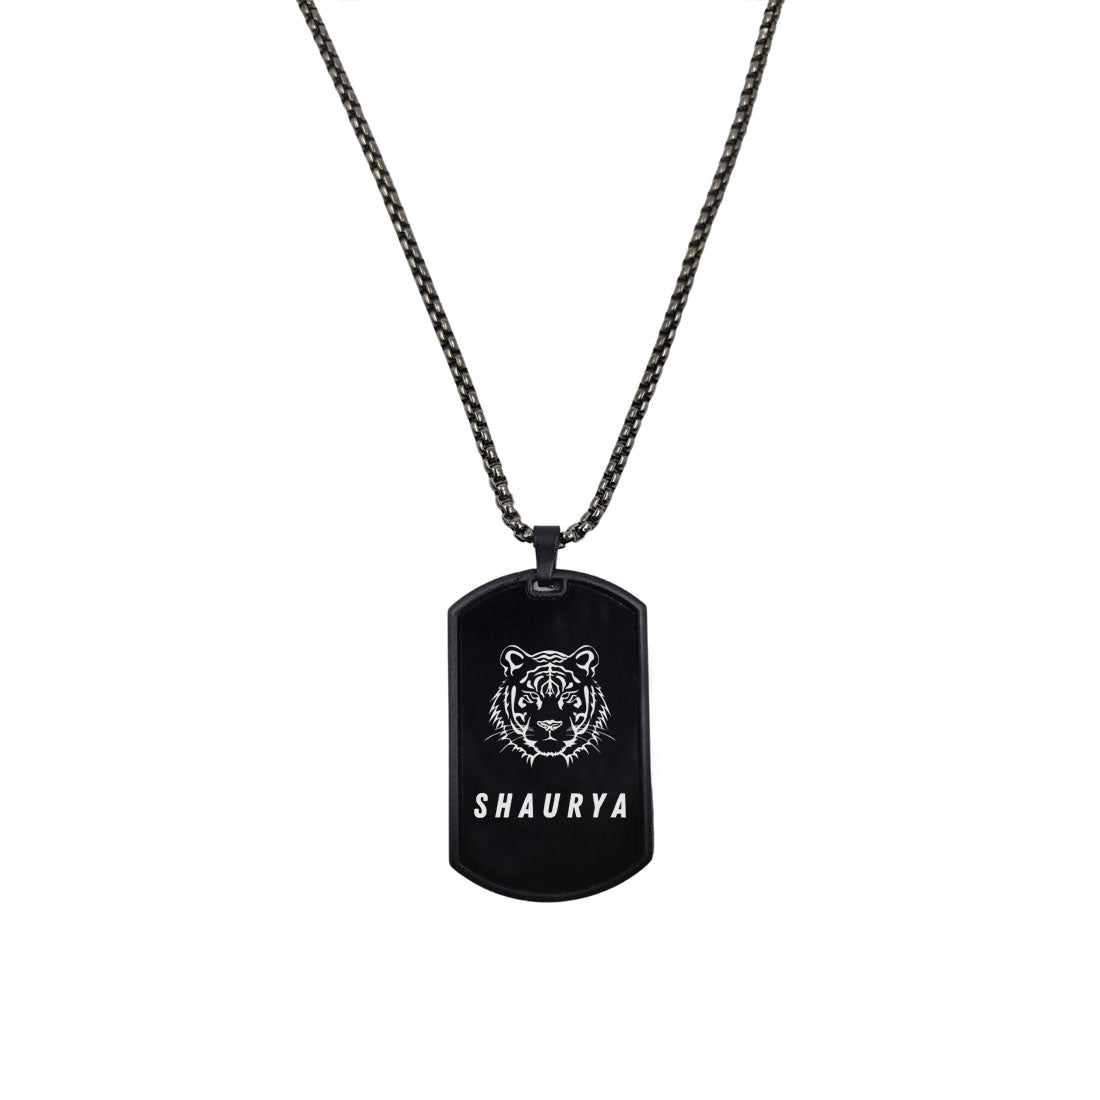 Engraved Dog Tag Necklace Creates a Truly Unique piece of Jewelry! —  adoremejewelry